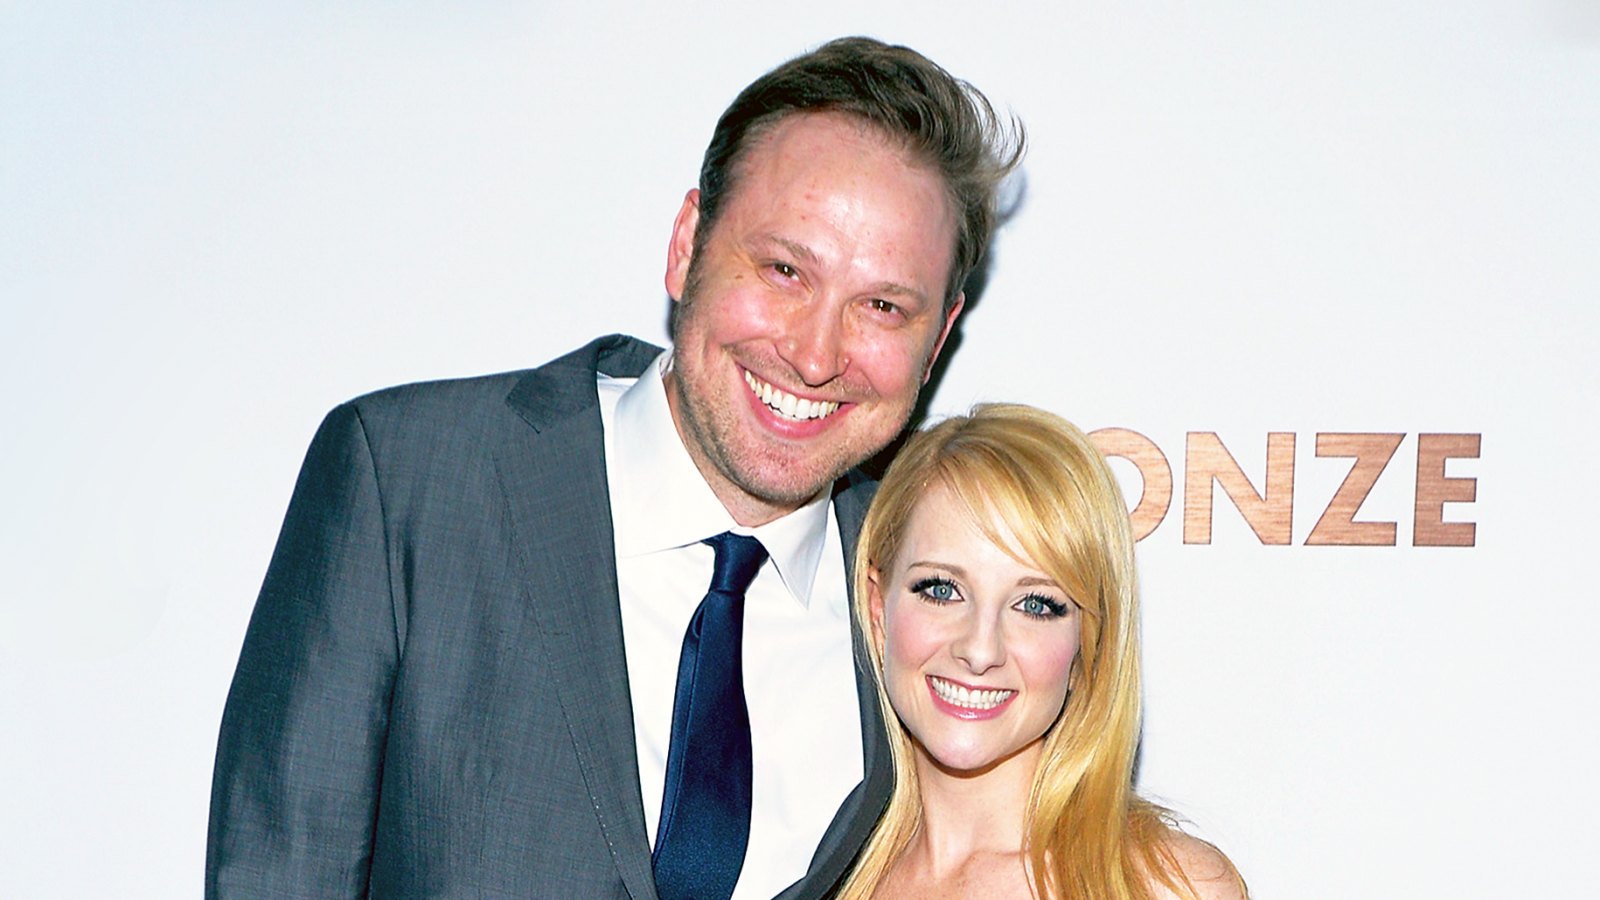 Melissa Rauch and husband Winston attend the premiere of Sony Pictures Classics' "The Bronze" at the Regent Theater in Los Angeles, California.